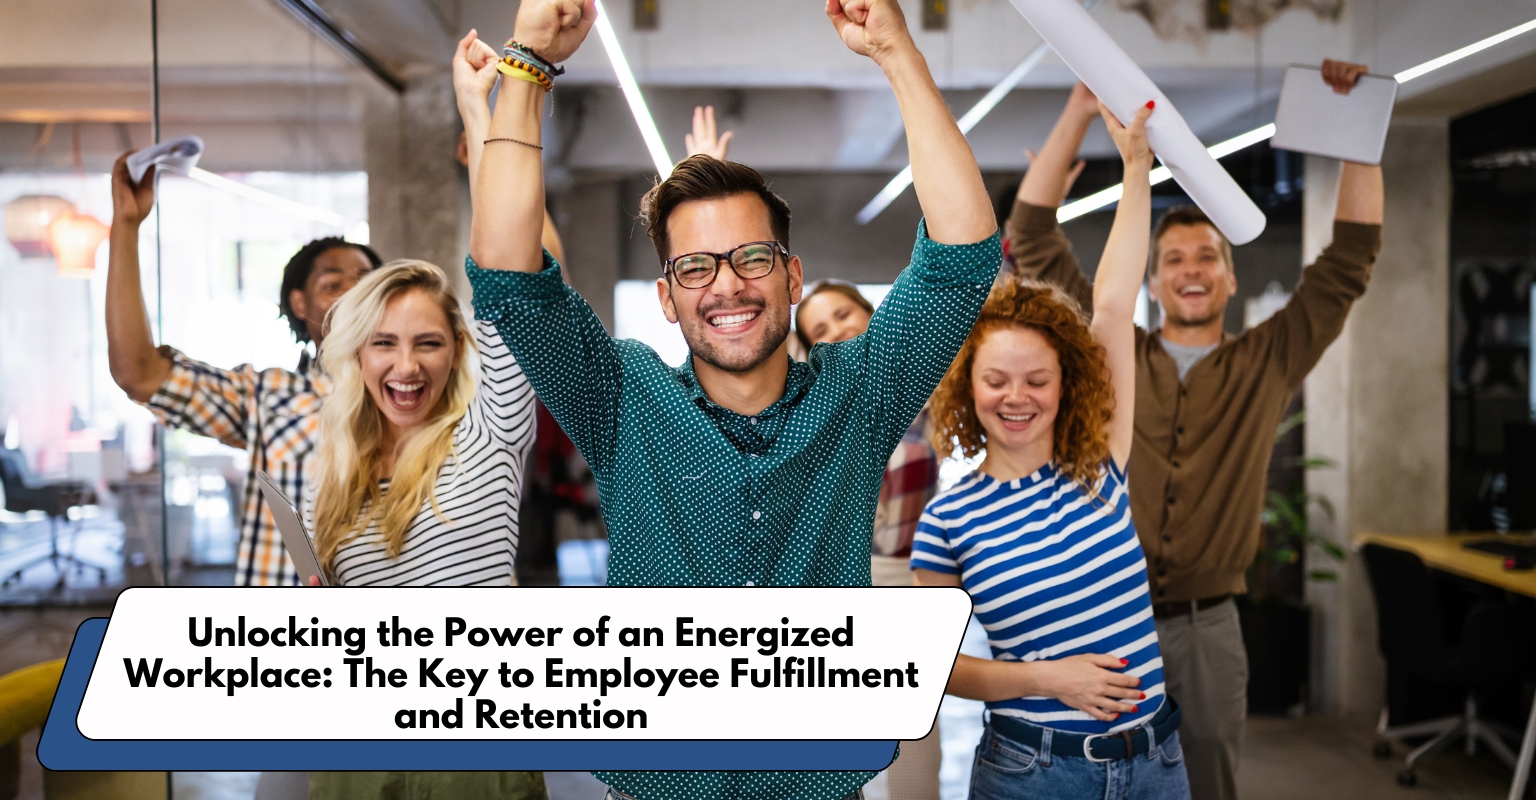 Employees thriving in an energized workplace